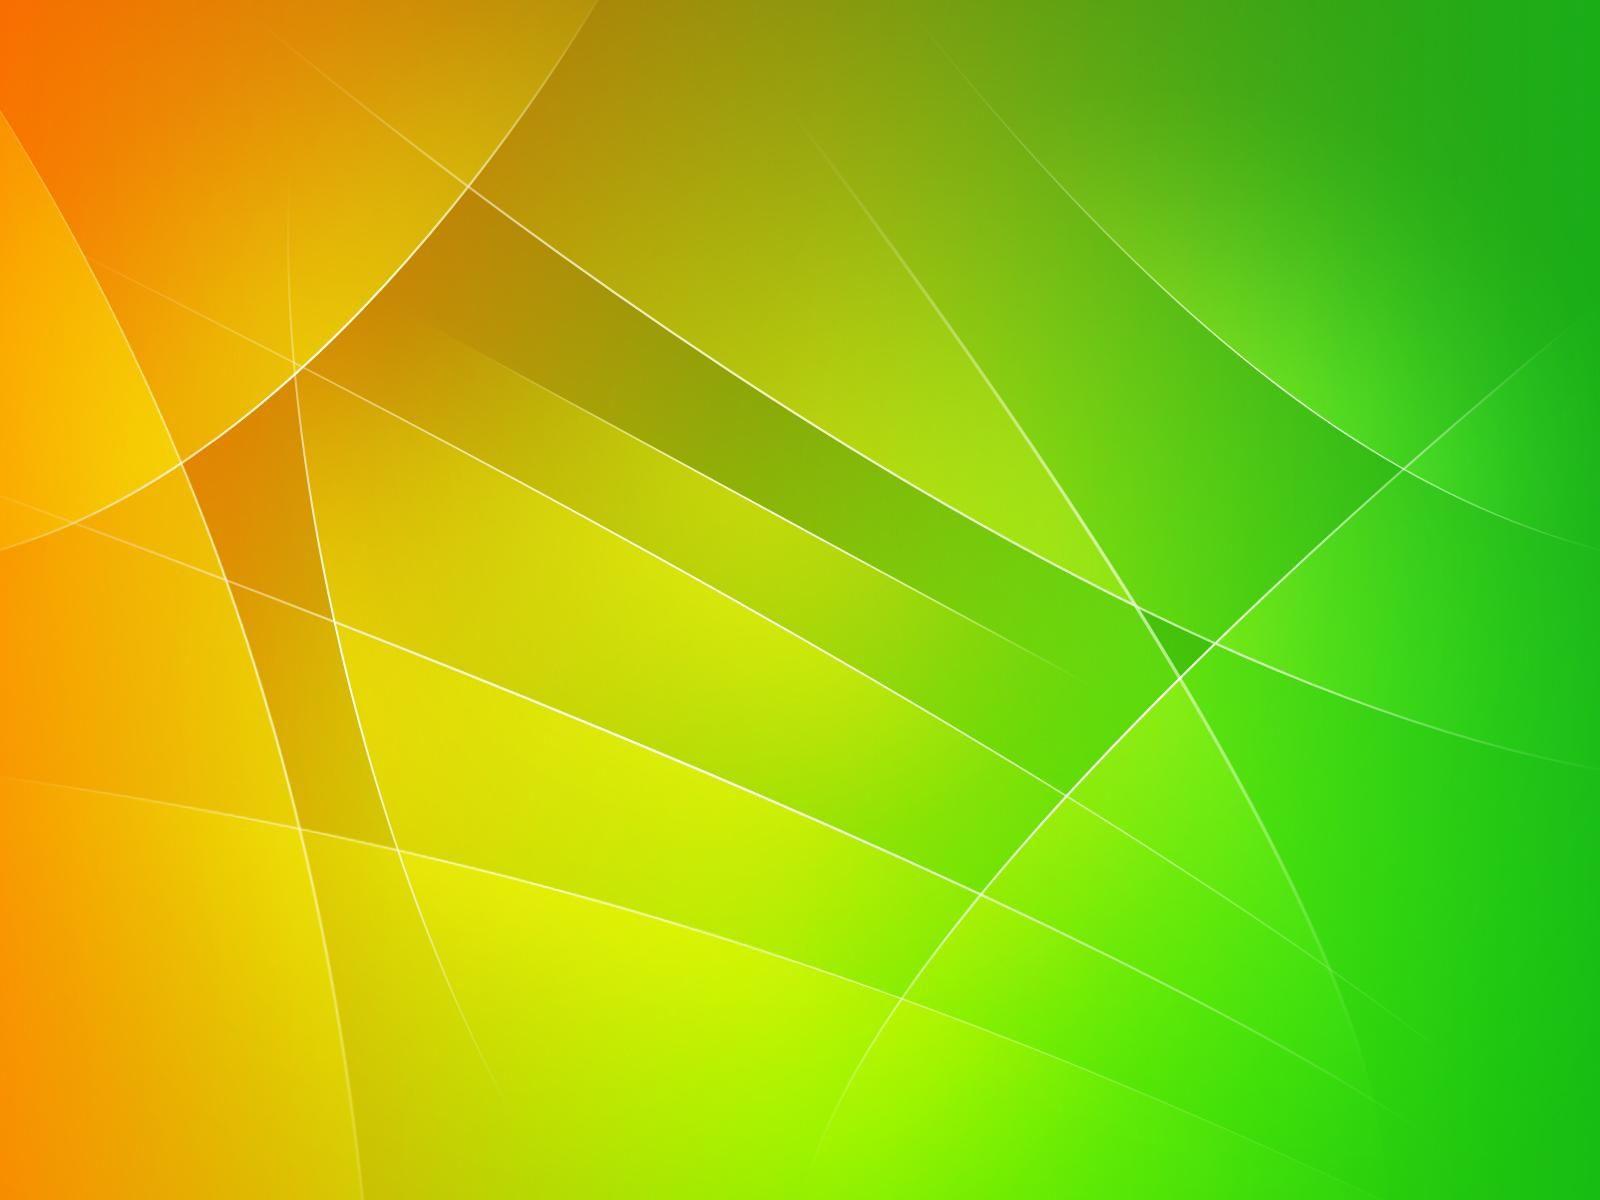 Green and Orange Wallpapers - Top Free Green and Orange Backgrounds ...